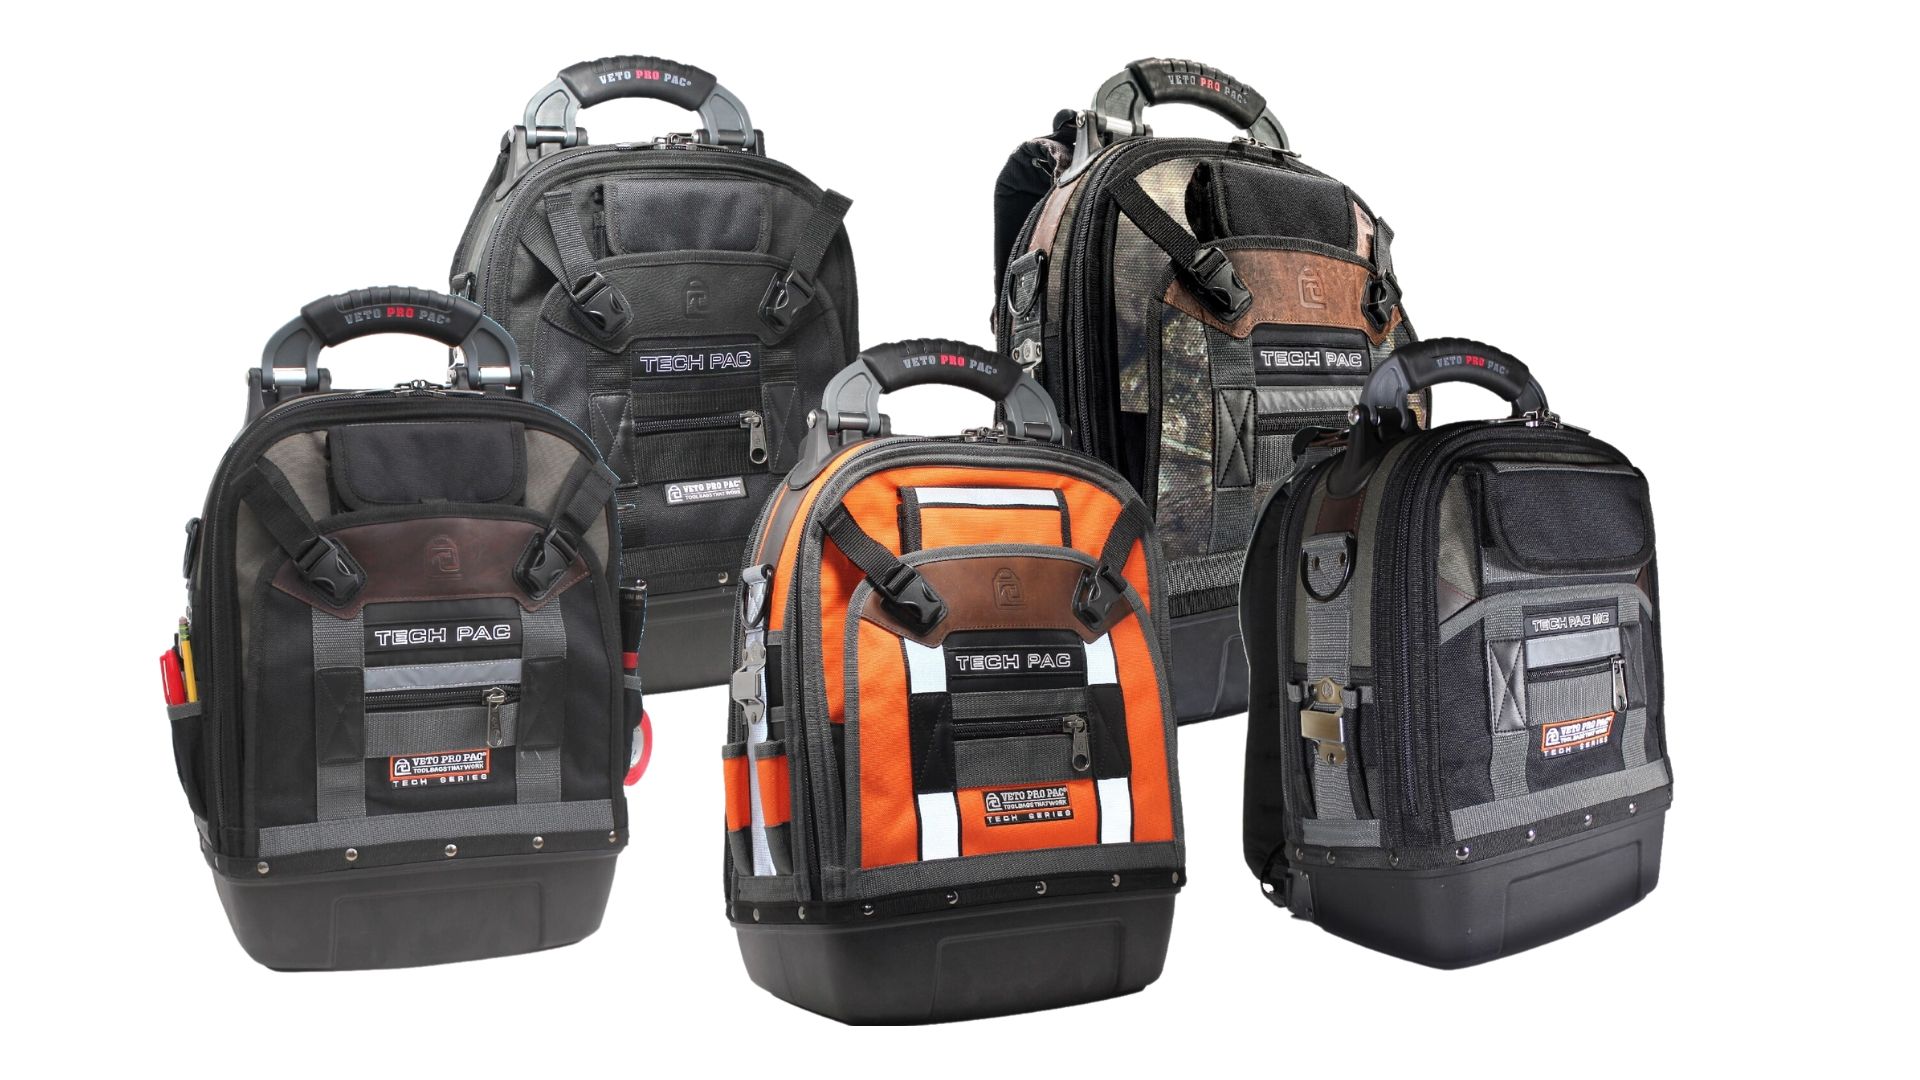 5 types of tool bags.